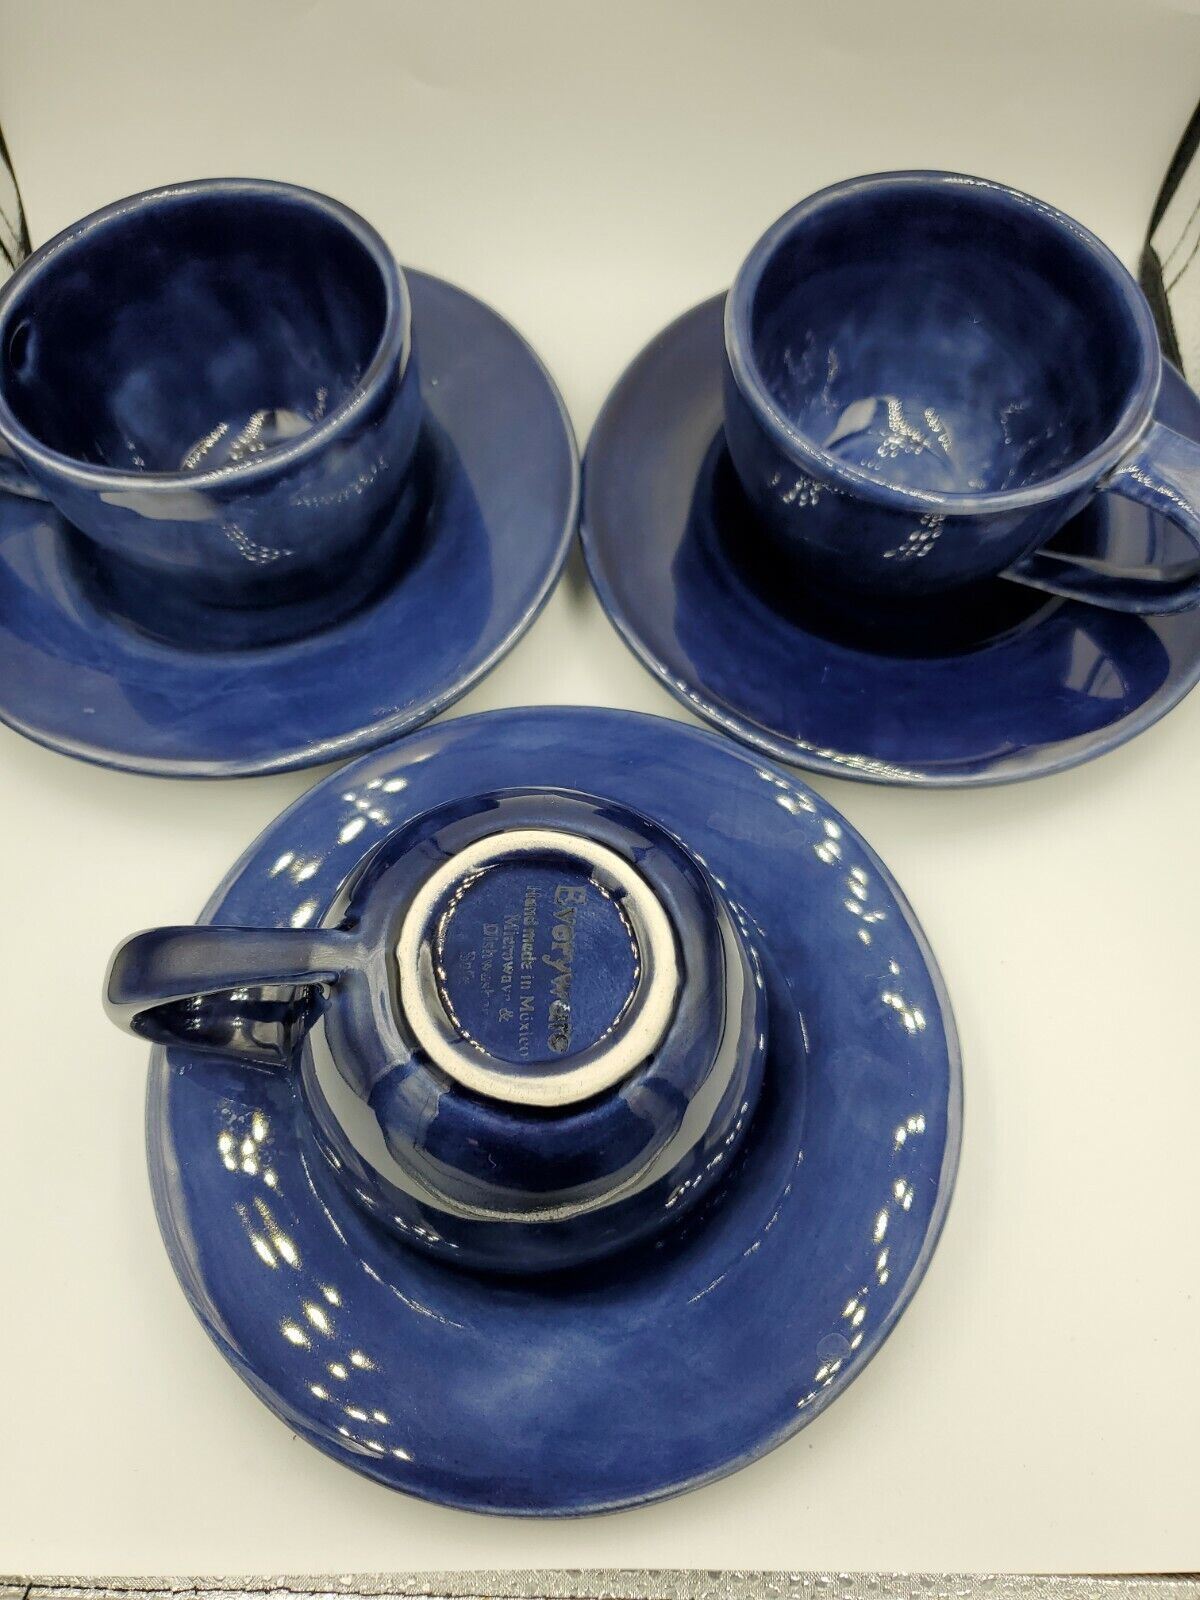 Pottery Barn Handmade pottery  set of four Cup and Saucer Colbalt blue.